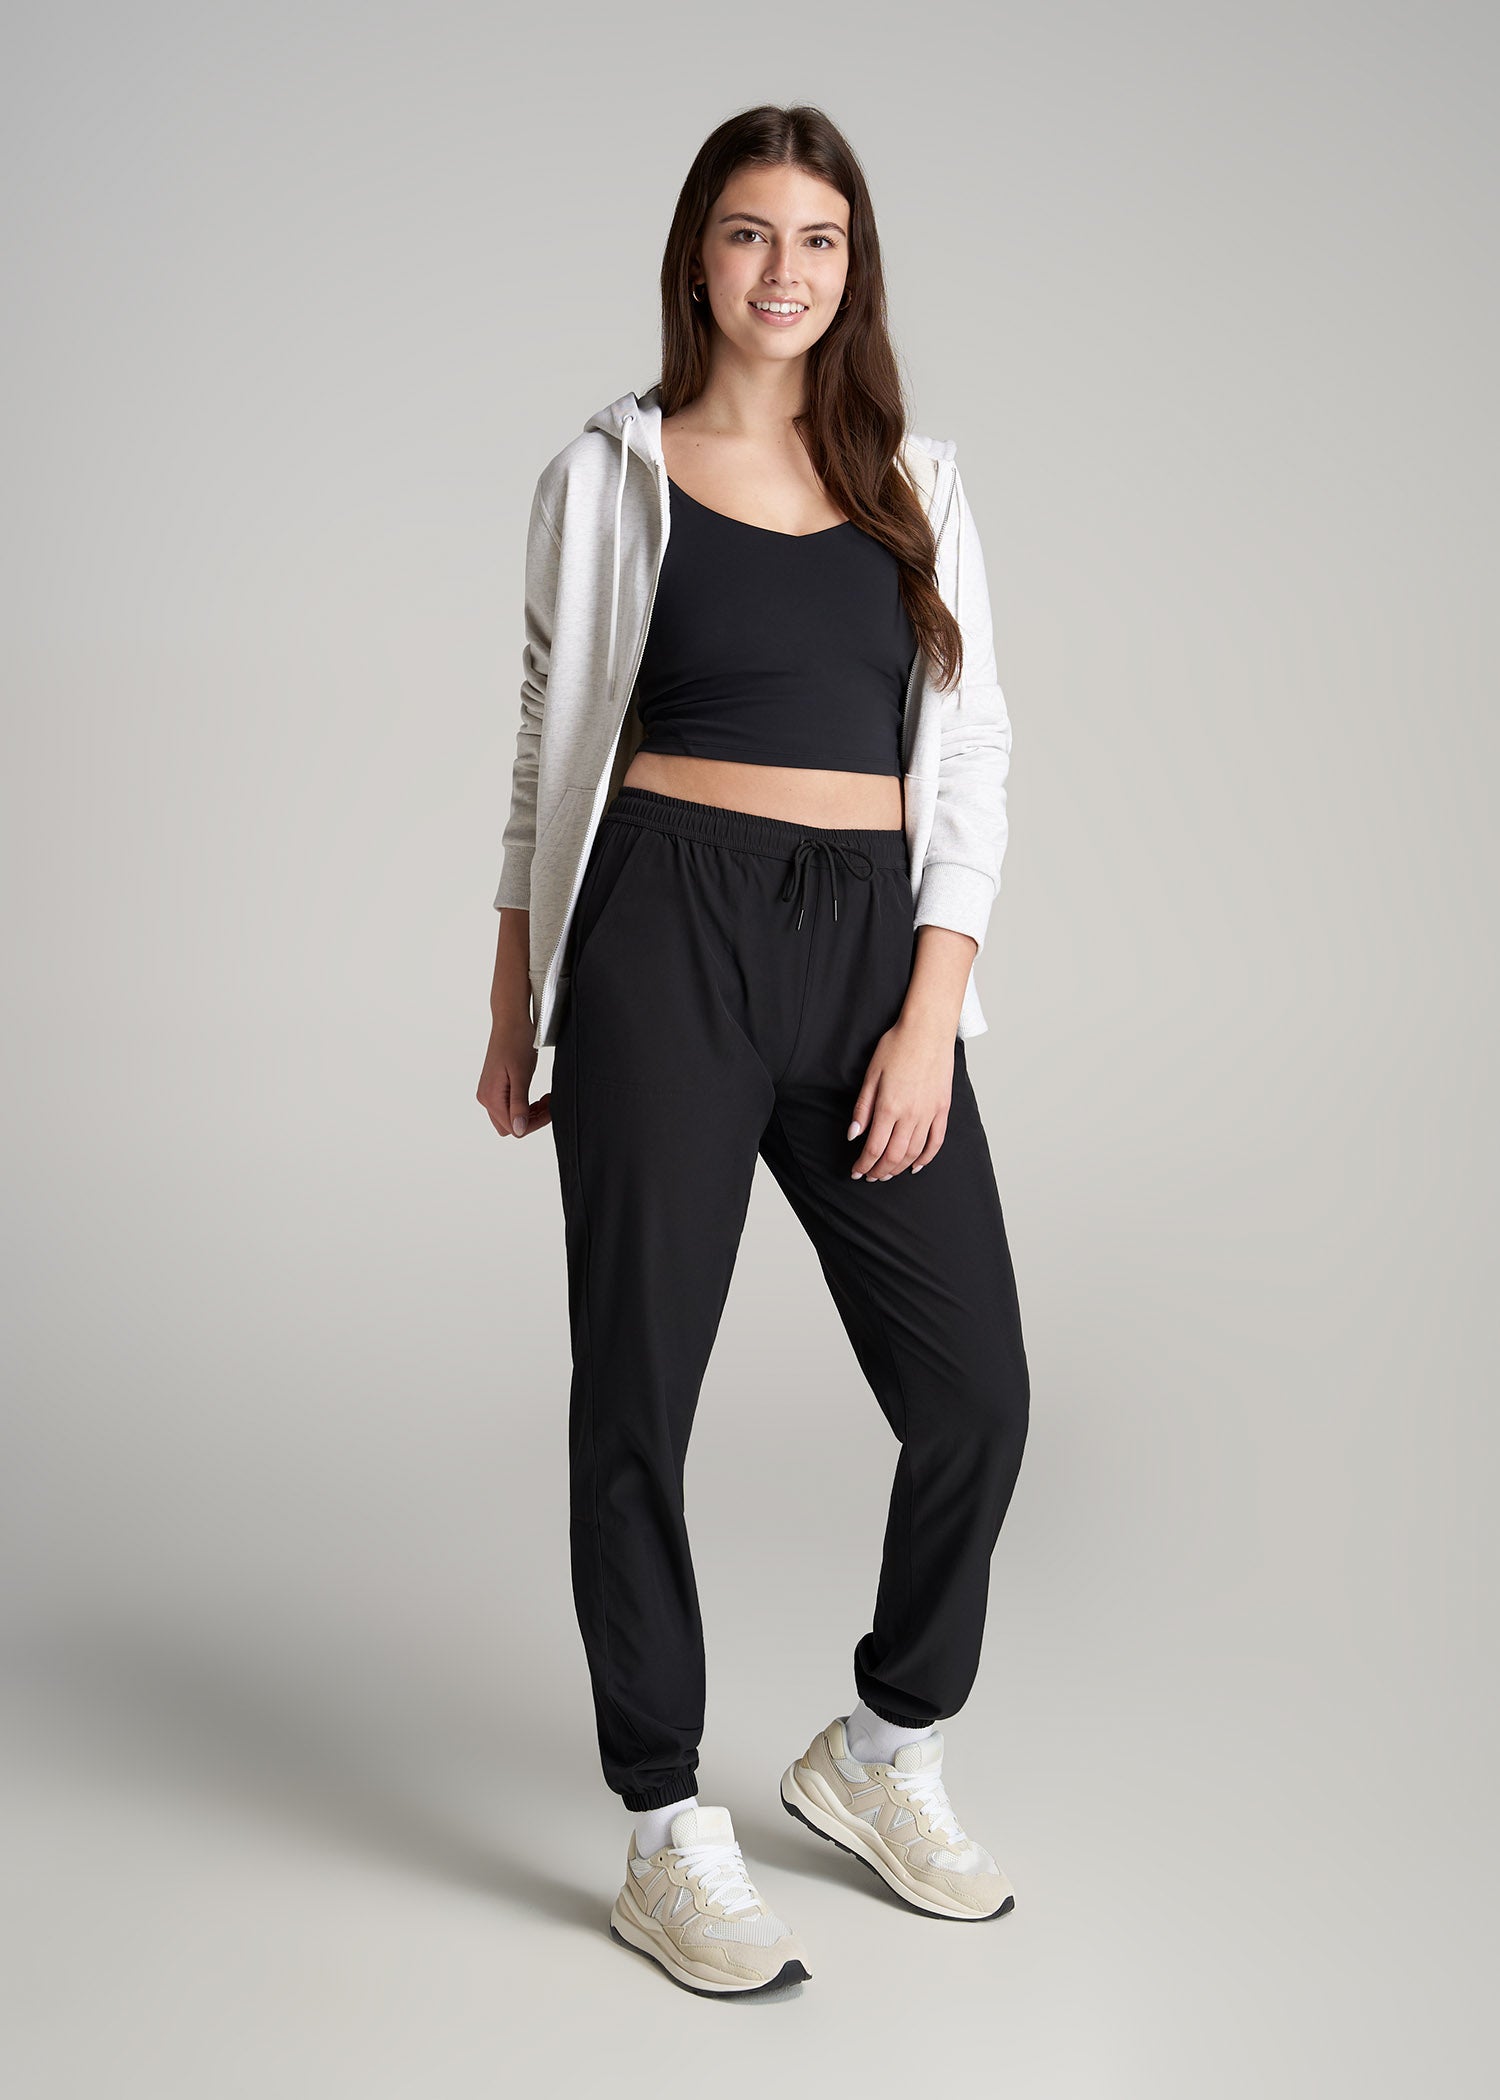 Stretch High-Rise Jogger  Joggers womens, Pants for women, Lululemon  joggers